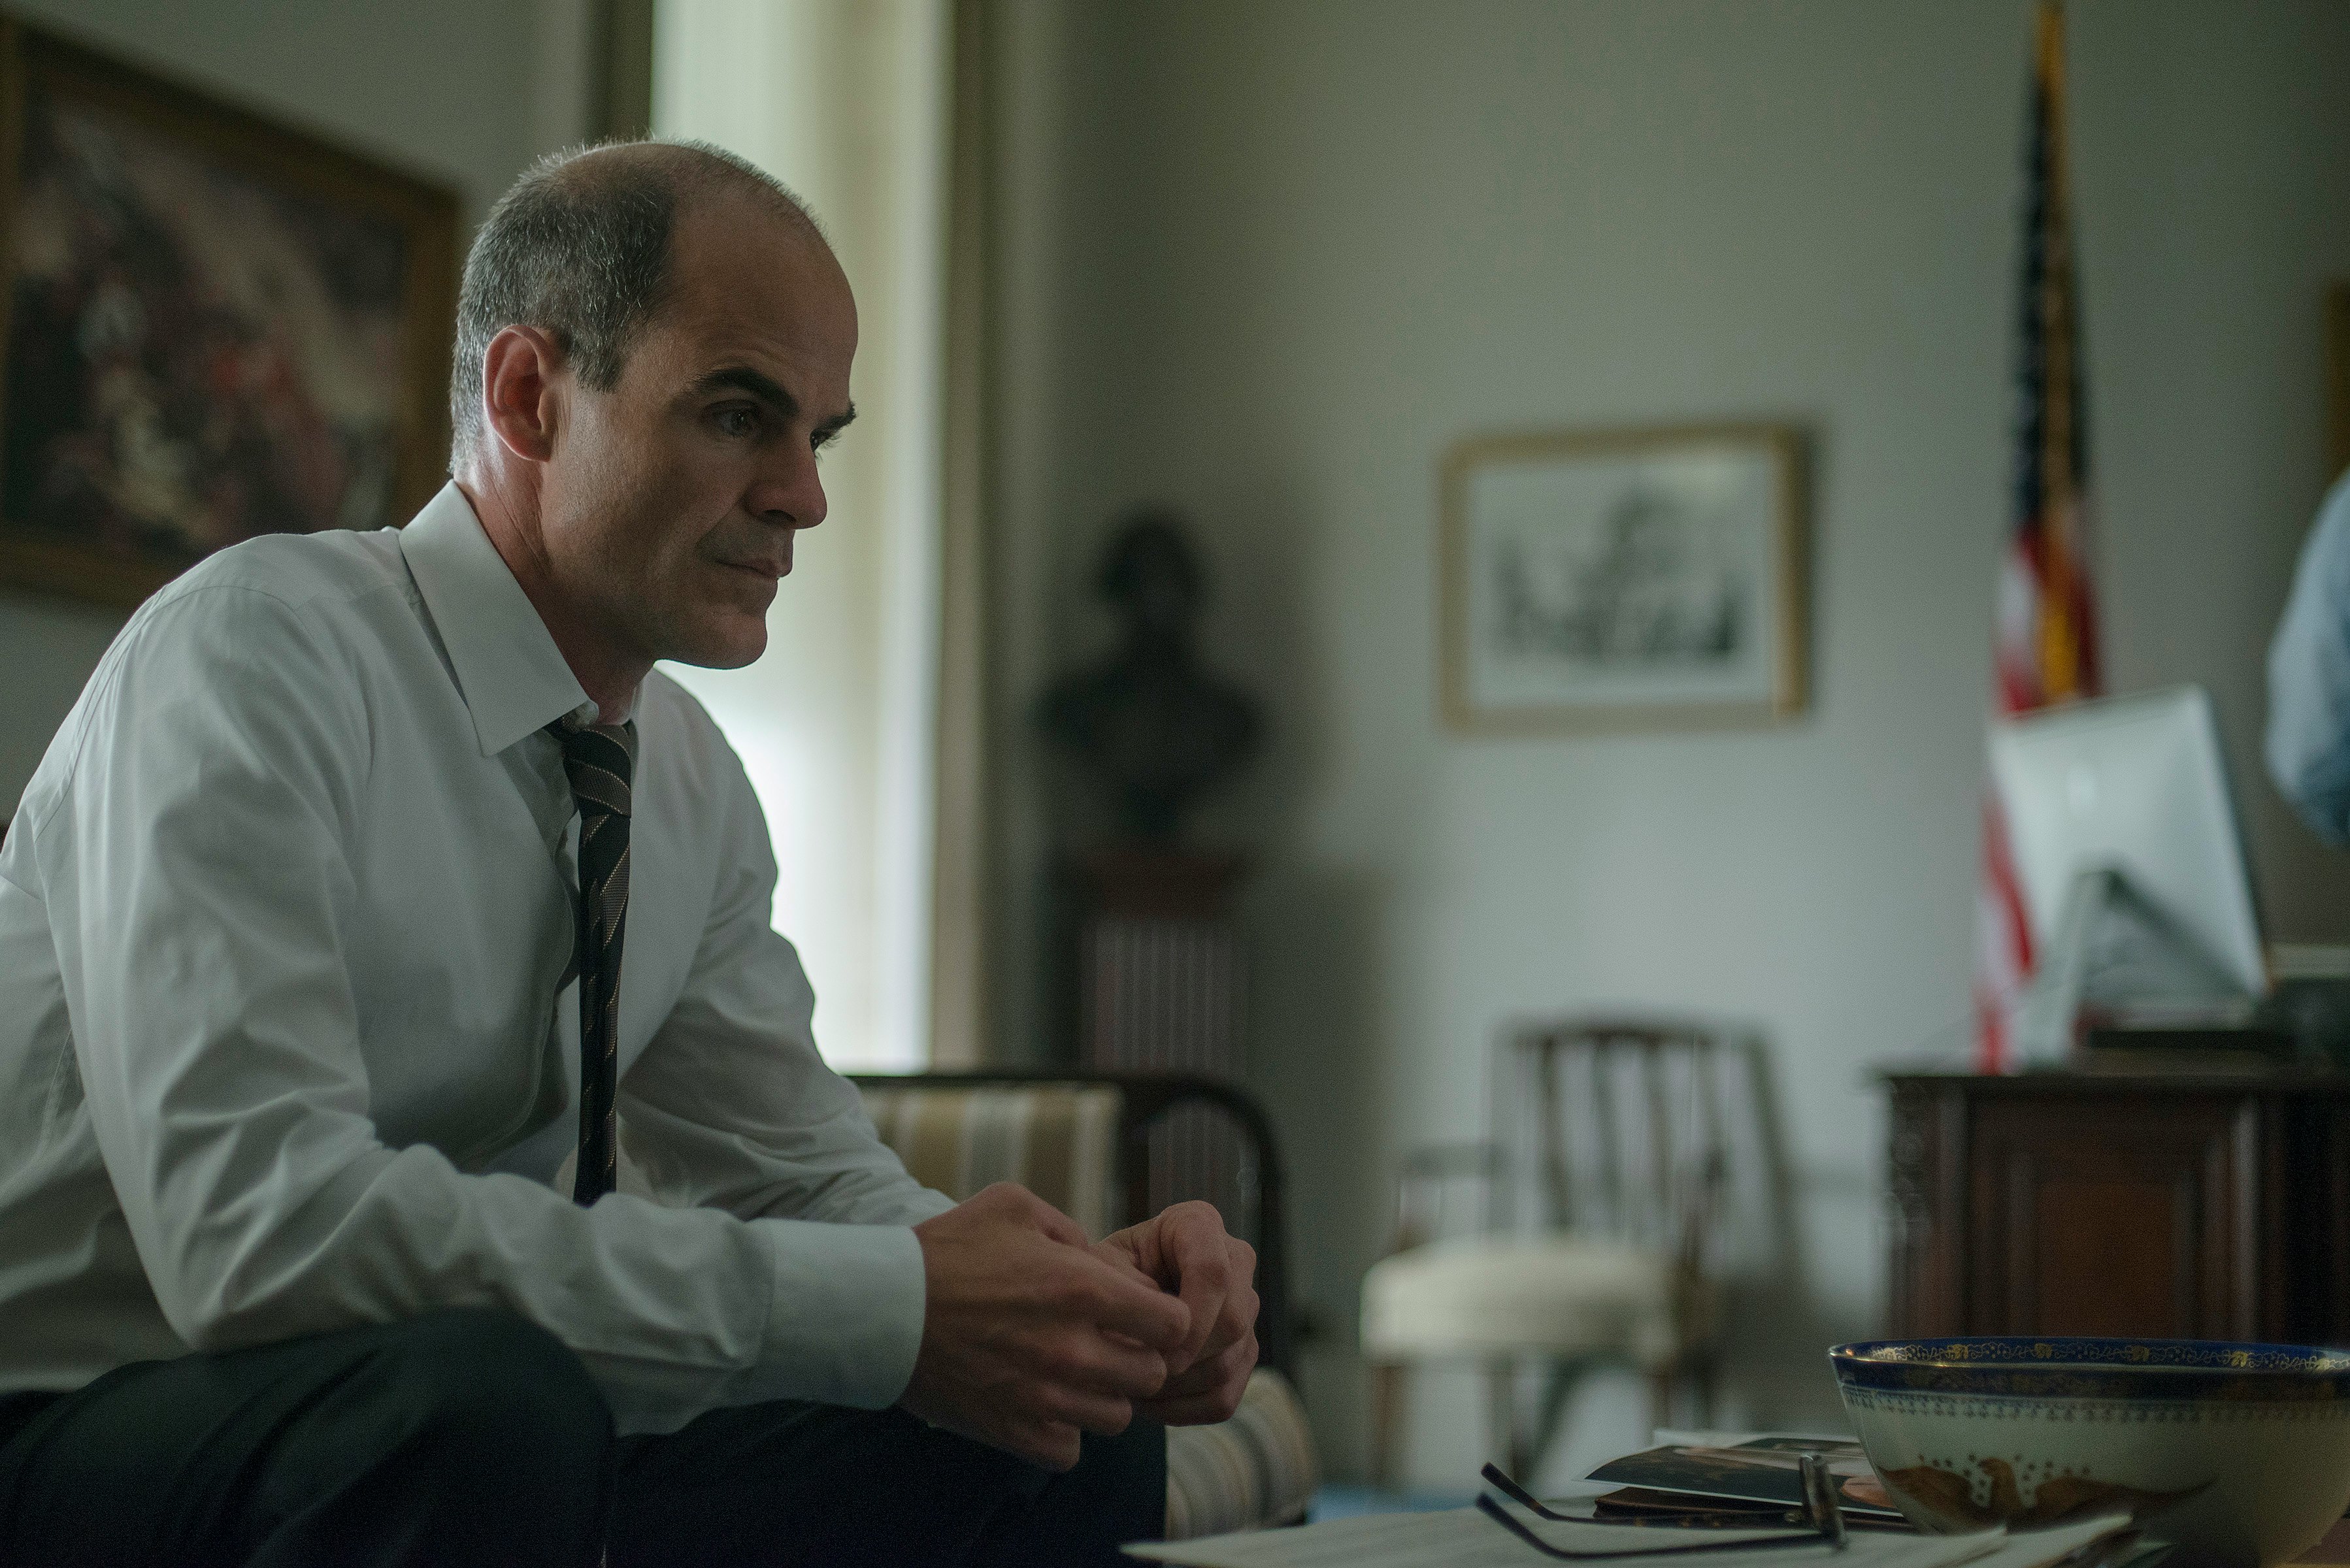 Doug Stamper Kills Rachel In The House Of Cards Season 3 Finale After A Relatively Calm Season